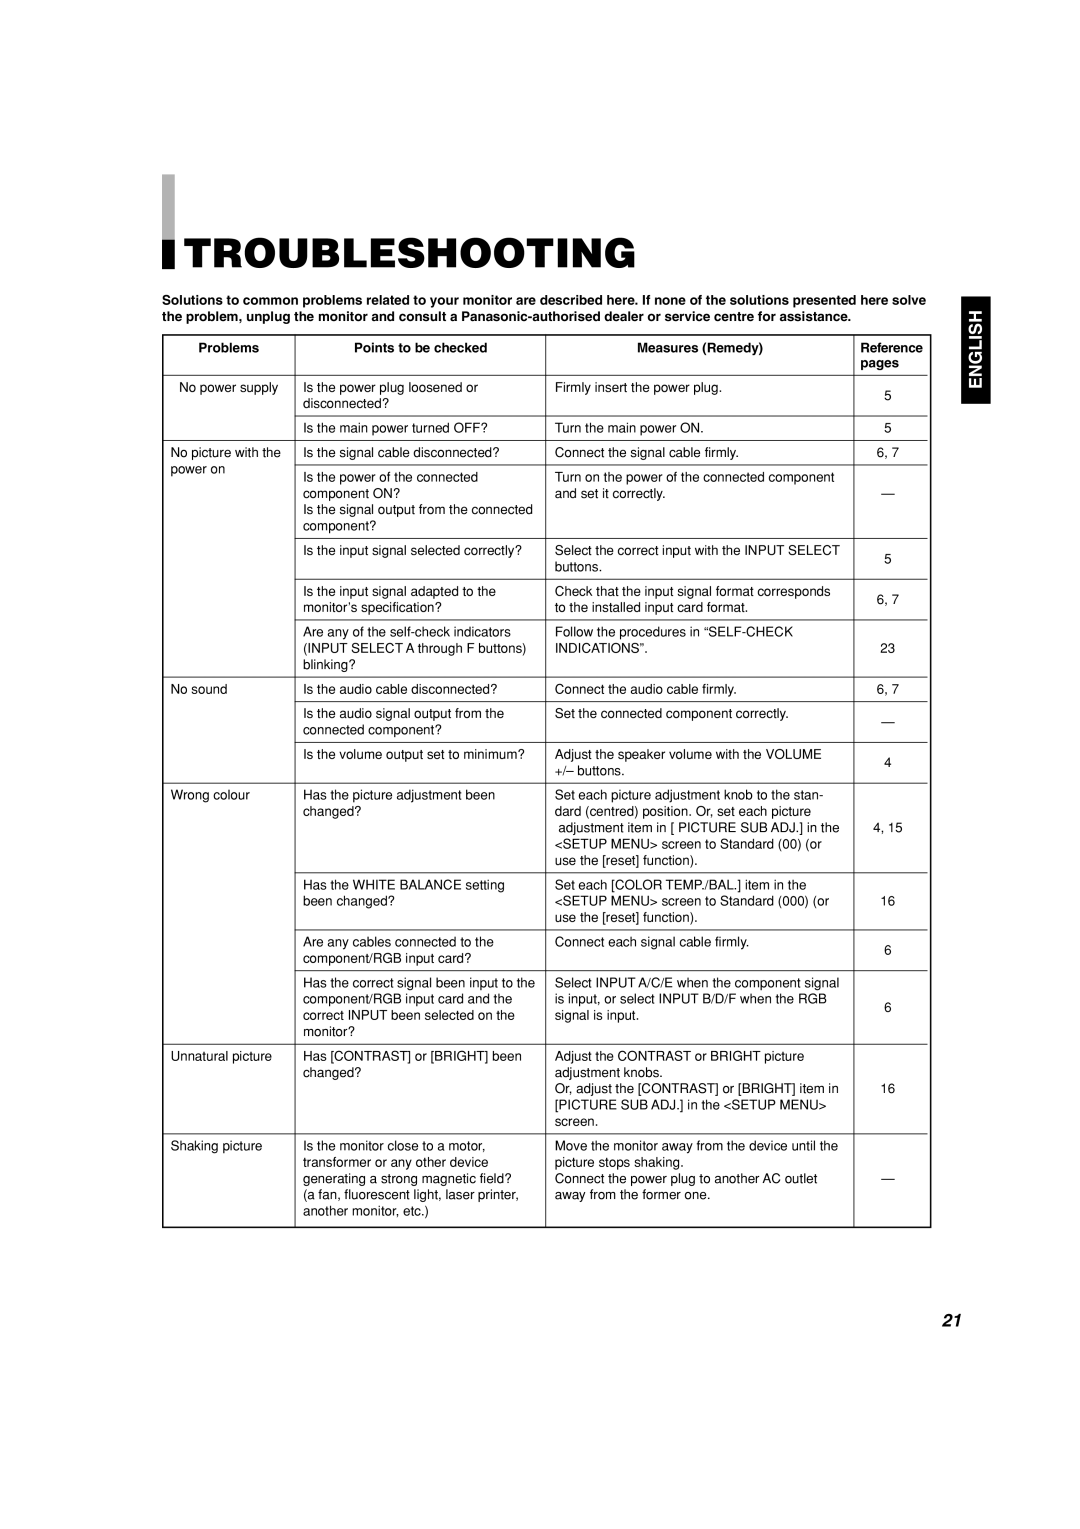 Panasonic BT-H1700AE manual Troubleshooting, English, Problems, Points to be checked, Measures Remedy, Reference, pages 